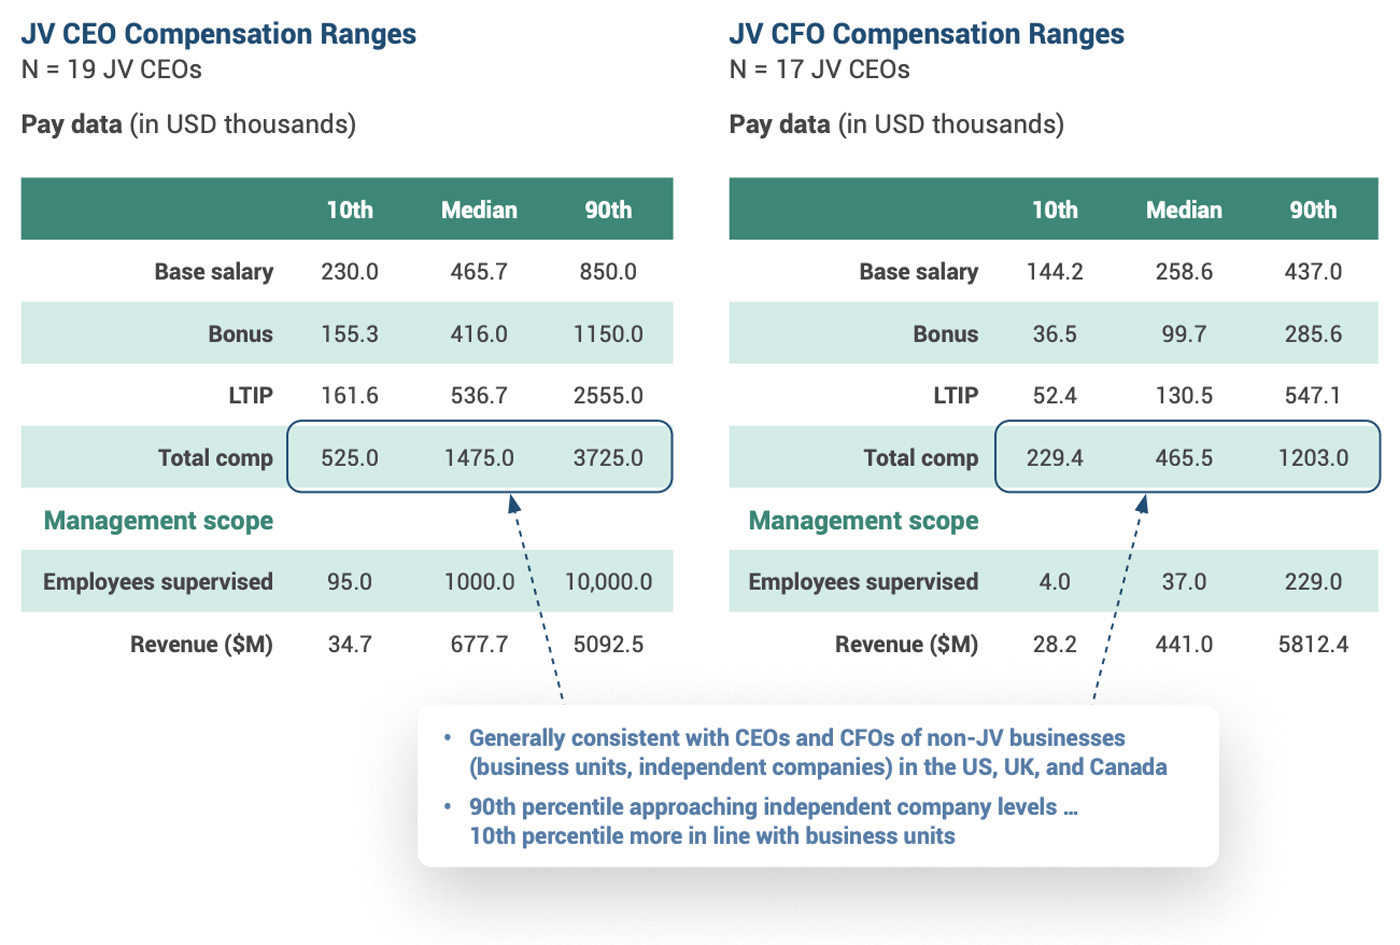 Exhibit 1: JV CEO and CFO Pay Level Data